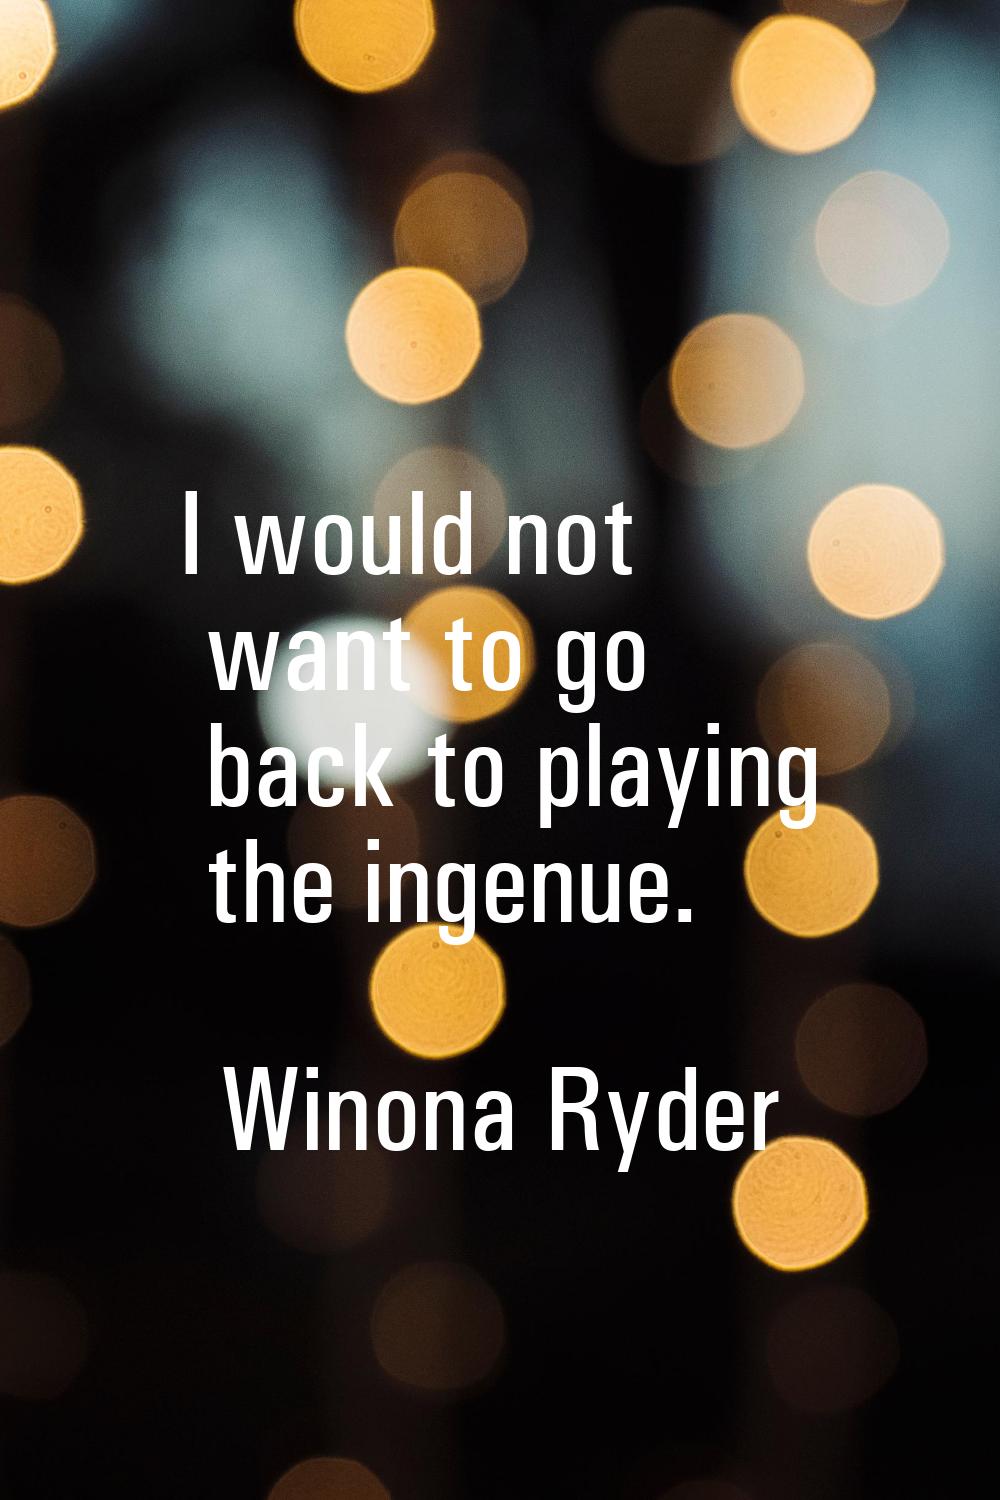 I would not want to go back to playing the ingenue.